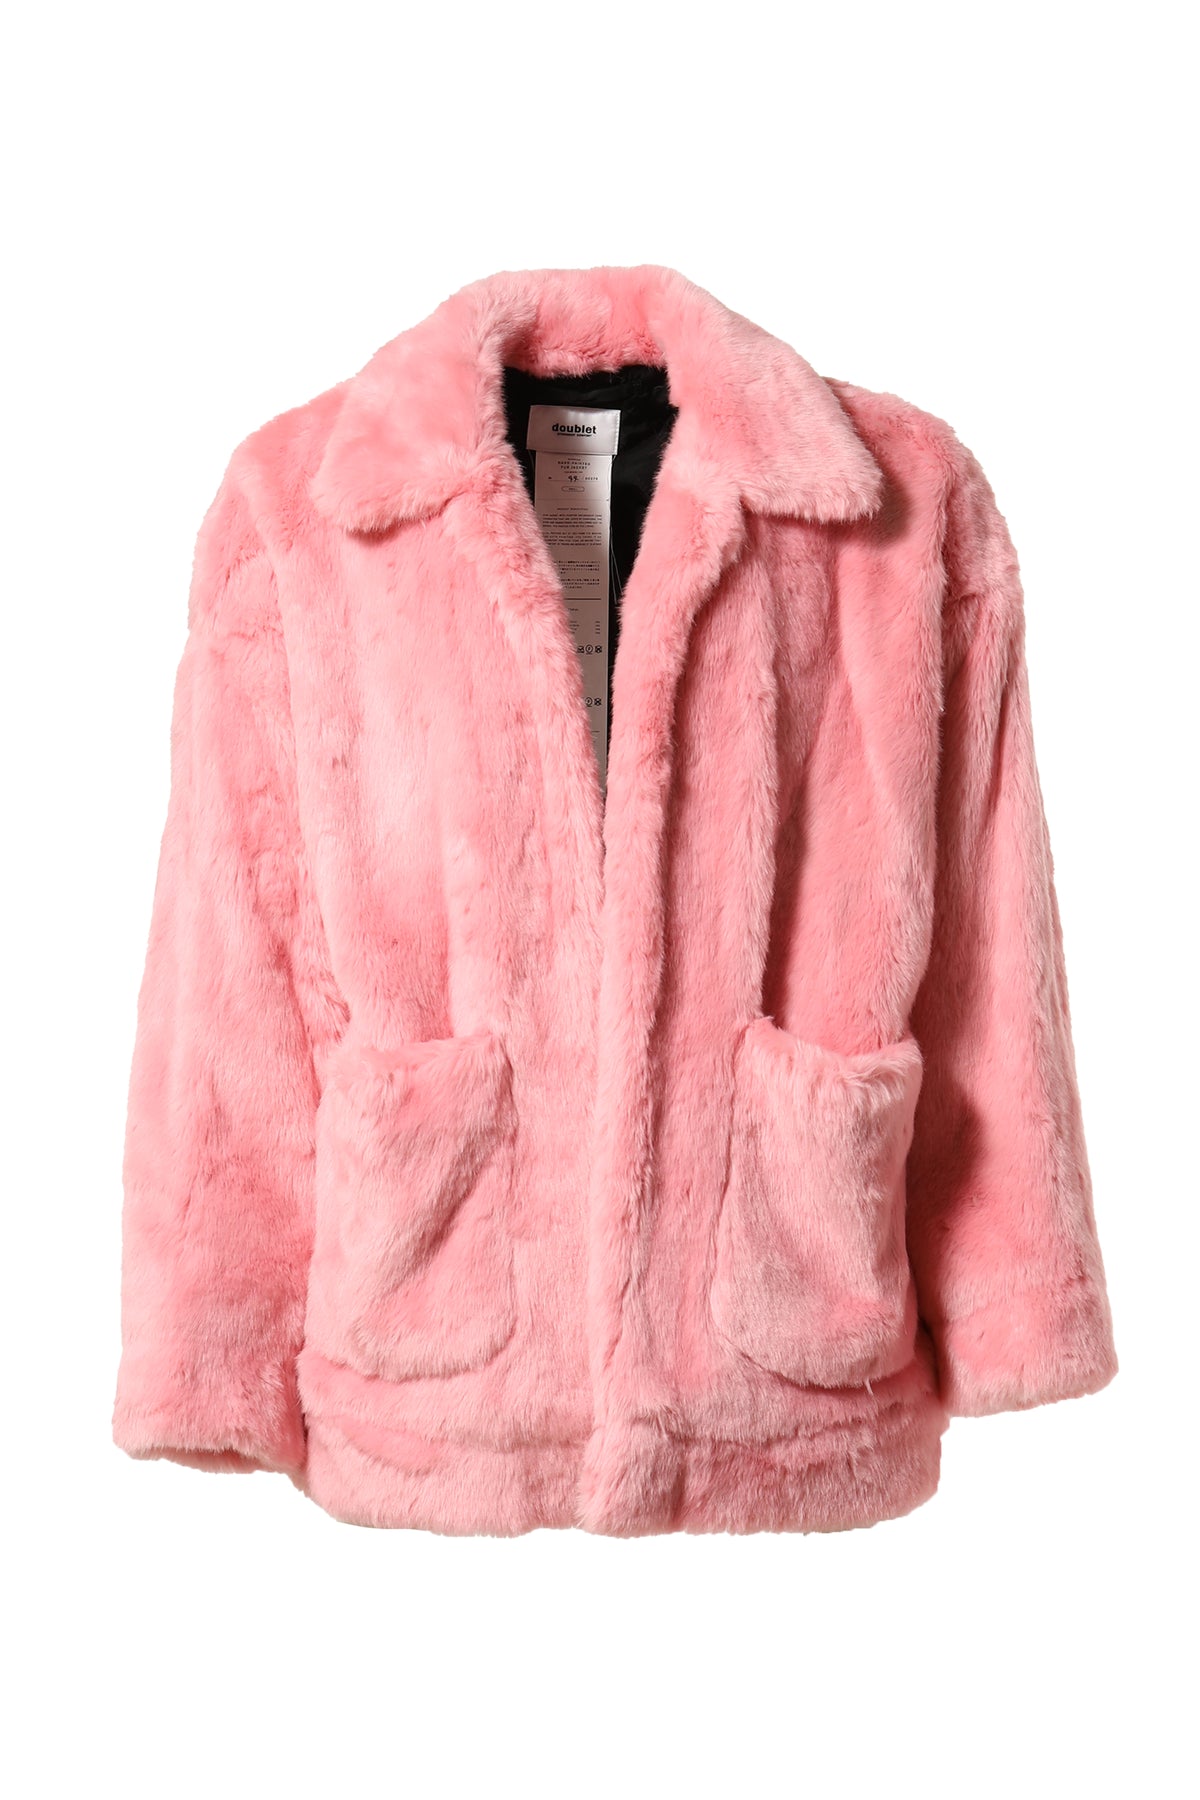 AND-PAINTED FUR JACKET / PNK